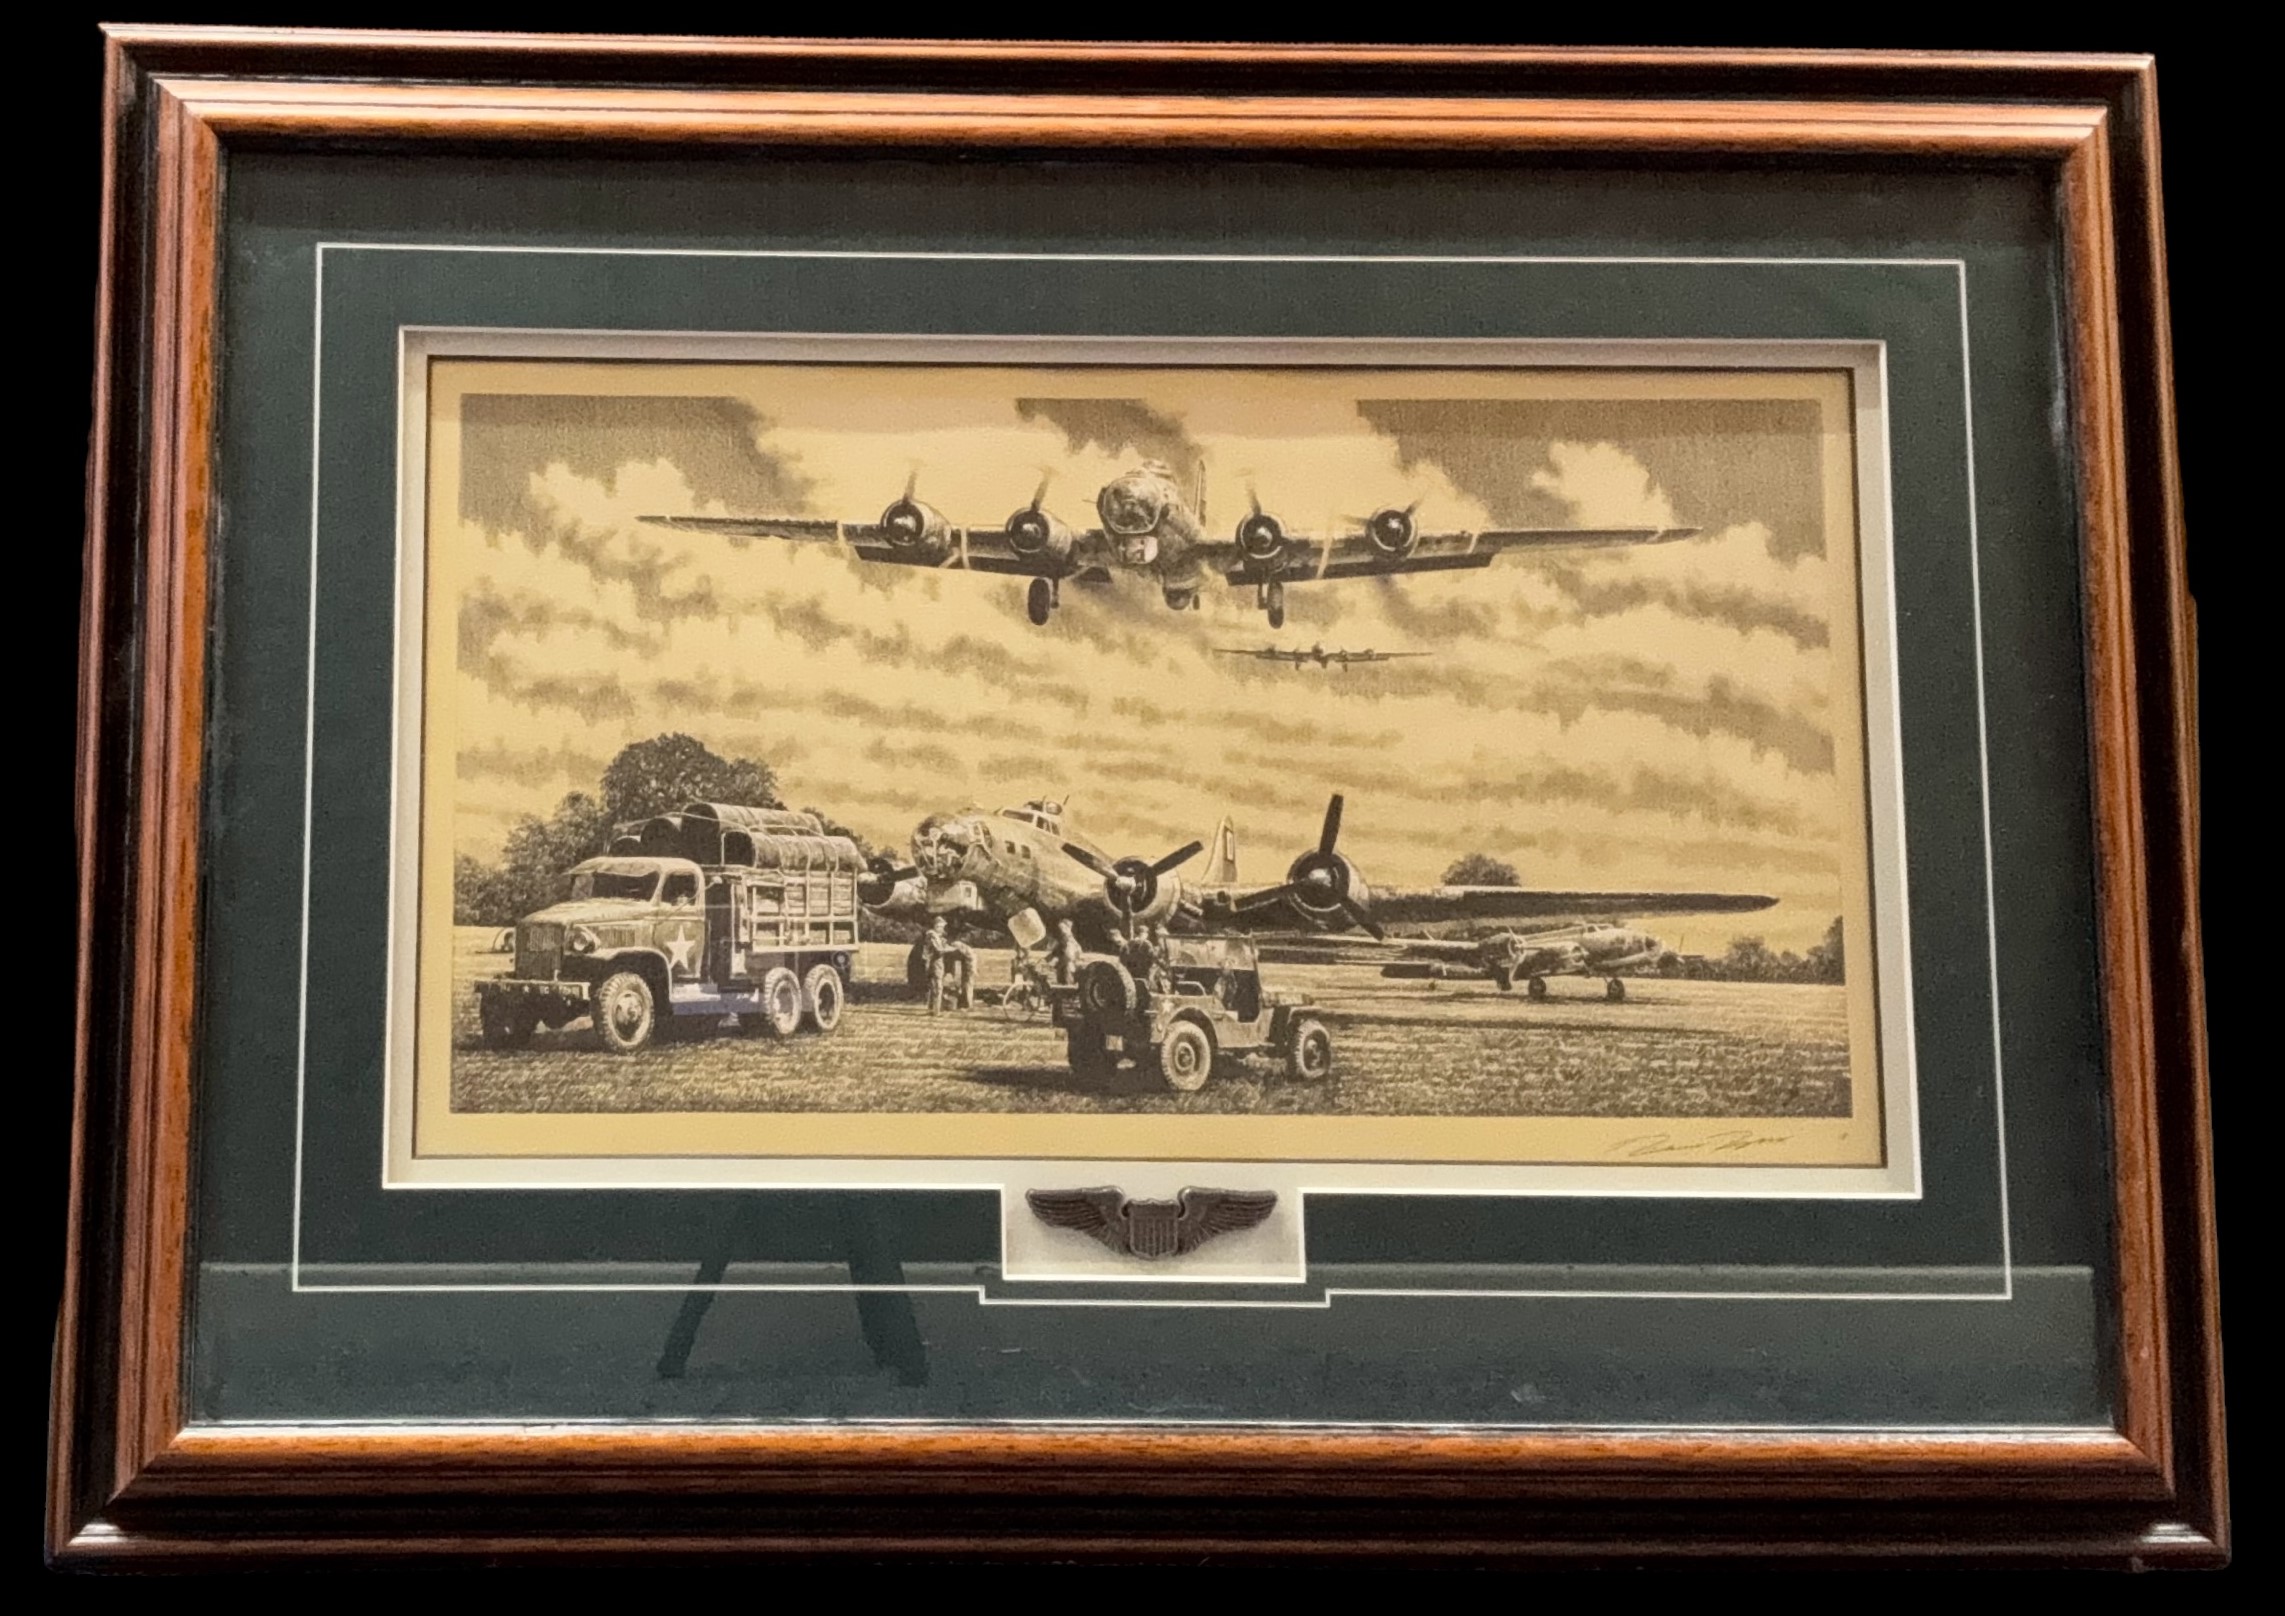 WW2 Print by Robert Taylor, Limited, picturing American bomber being prepared for action, includes